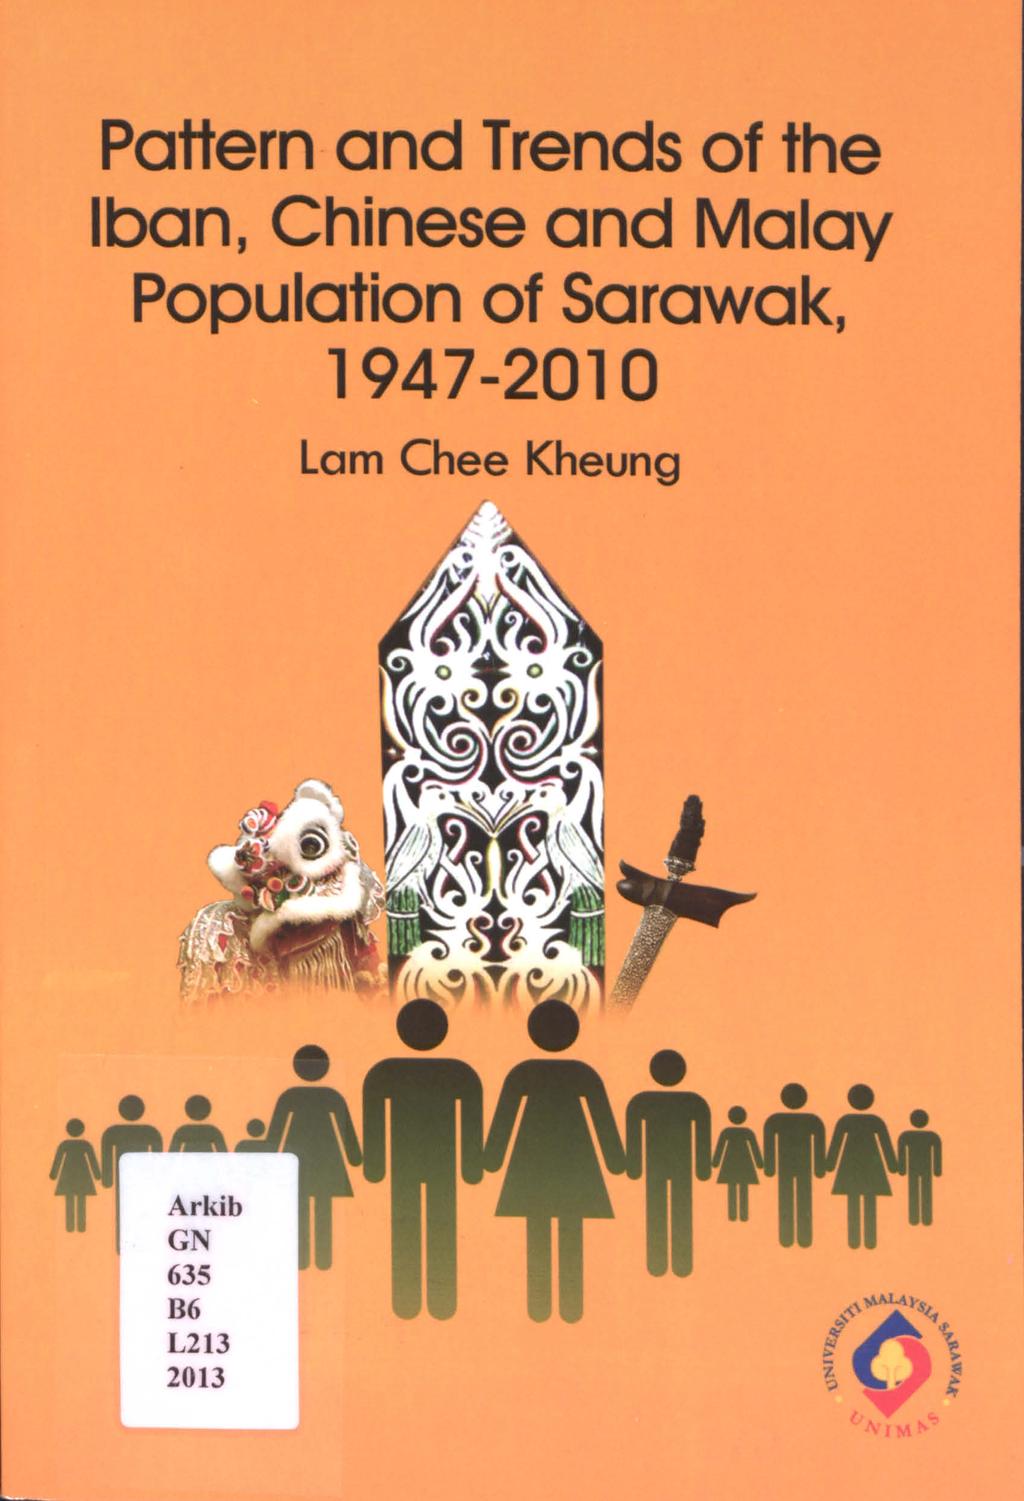 Pattern and Trends of the Iban, Chinese and Malay Population of Sarawak, 1947-2010